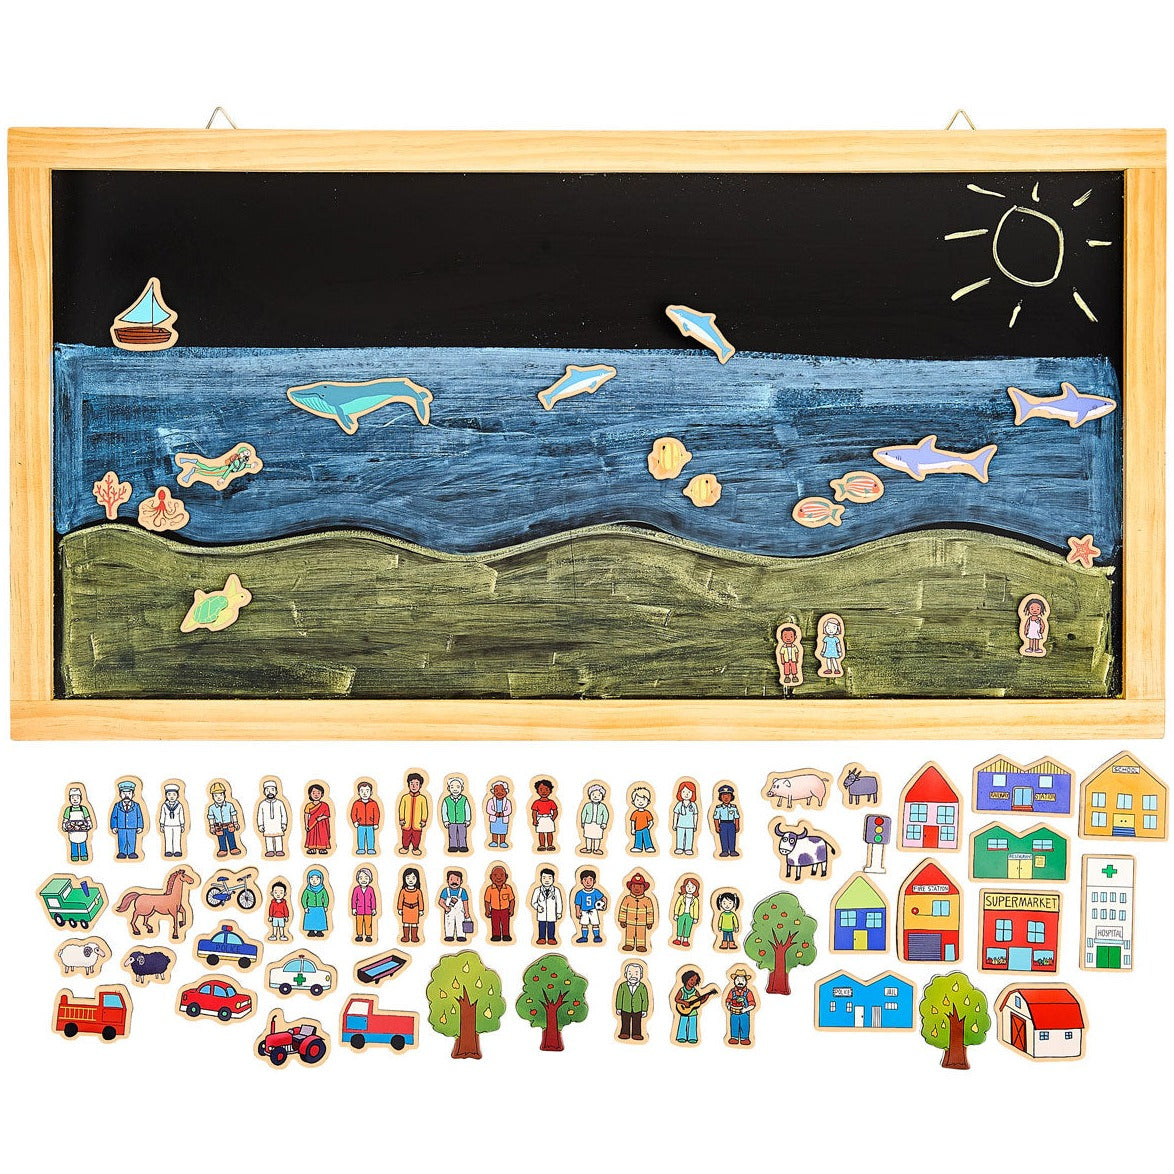 Tell a Story Magnetic Board, Introduce your child to the joys of creative play and storytelling with our ultimate storytelling board! This amazing set provides the perfect opportunity for your child to explore their imagination while also opening up conversations about different roles within our community.Featuring a generously sized hanging magnetic chalkboard as the background, this set includes 75 thick wooden magnetic pieces that feature a diverse range of people from different ages, genders, ethnic bac